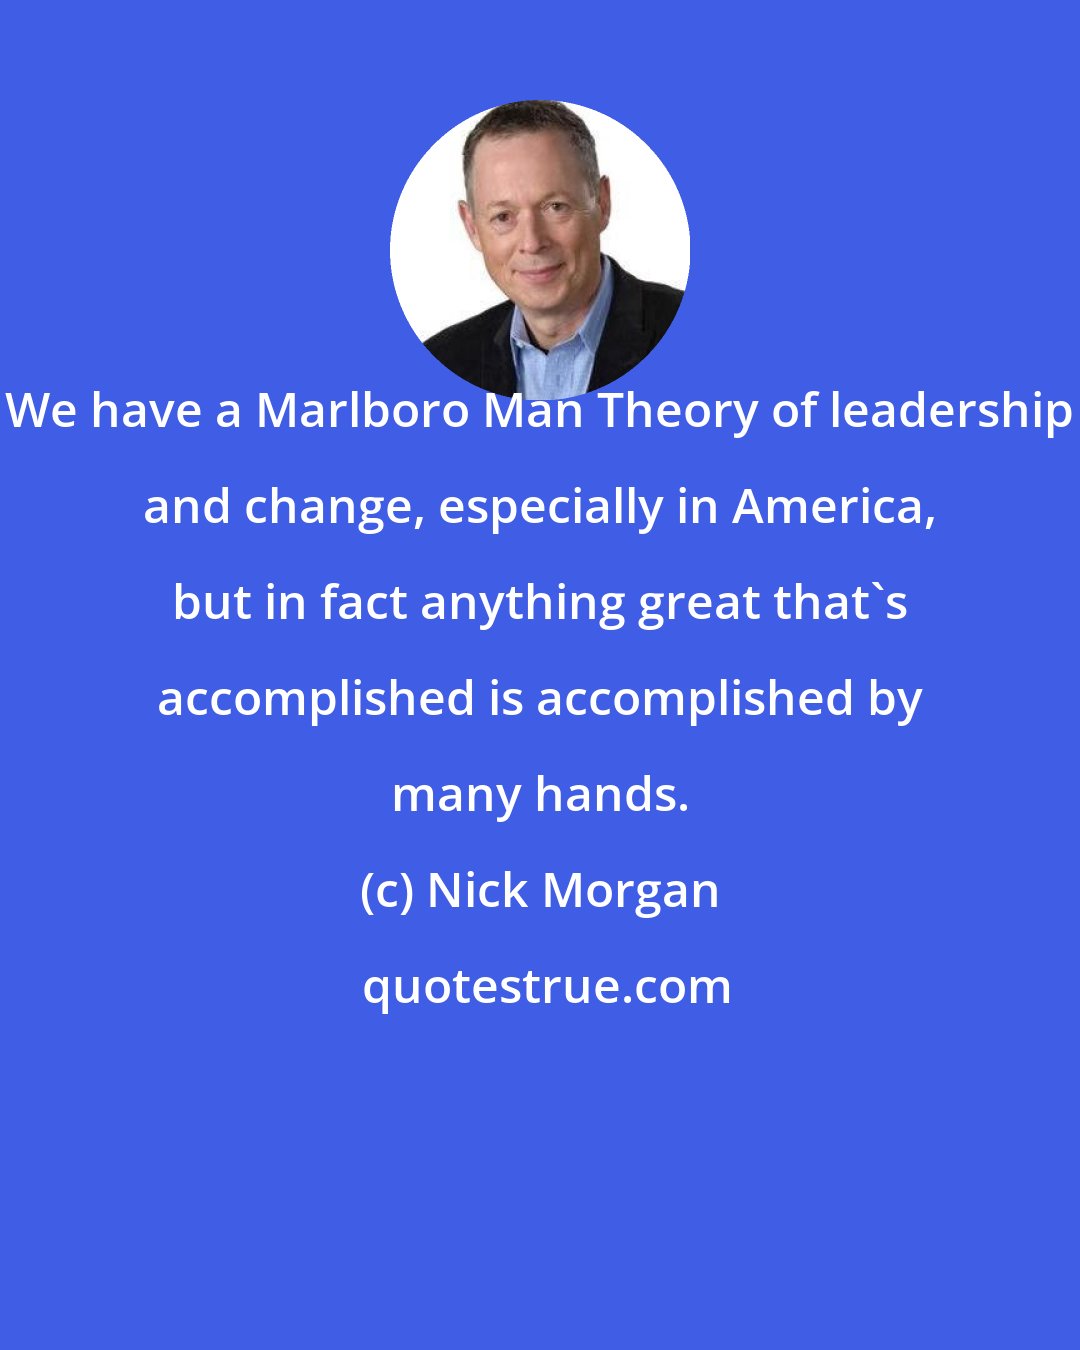 Nick Morgan: We have a Marlboro Man Theory of leadership and change, especially in America, but in fact anything great that's accomplished is accomplished by many hands.